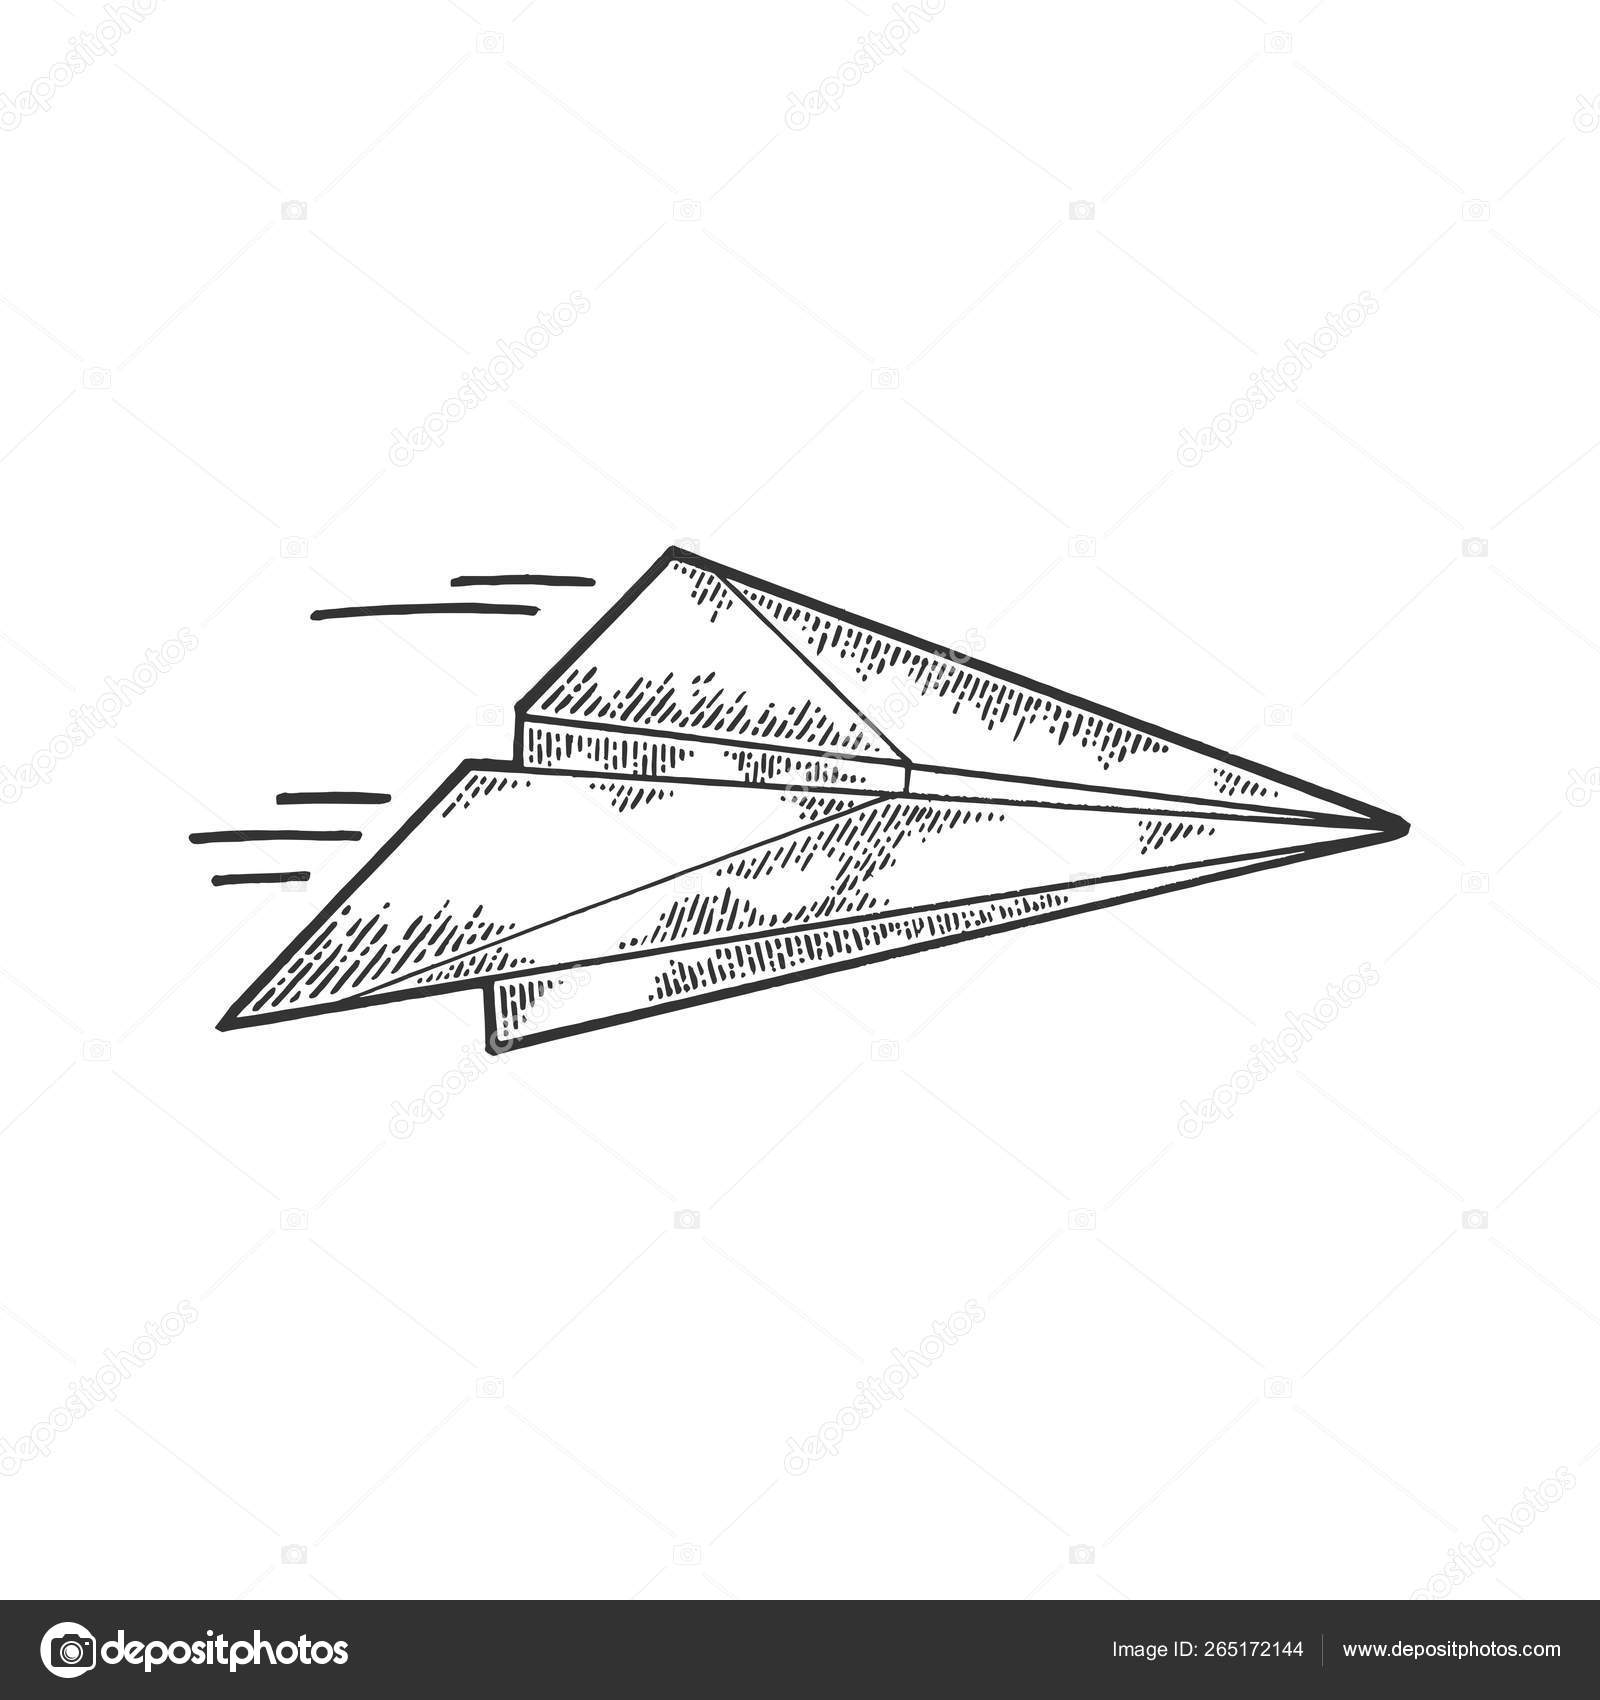 How To Make A Paper Airplane - Twinkl